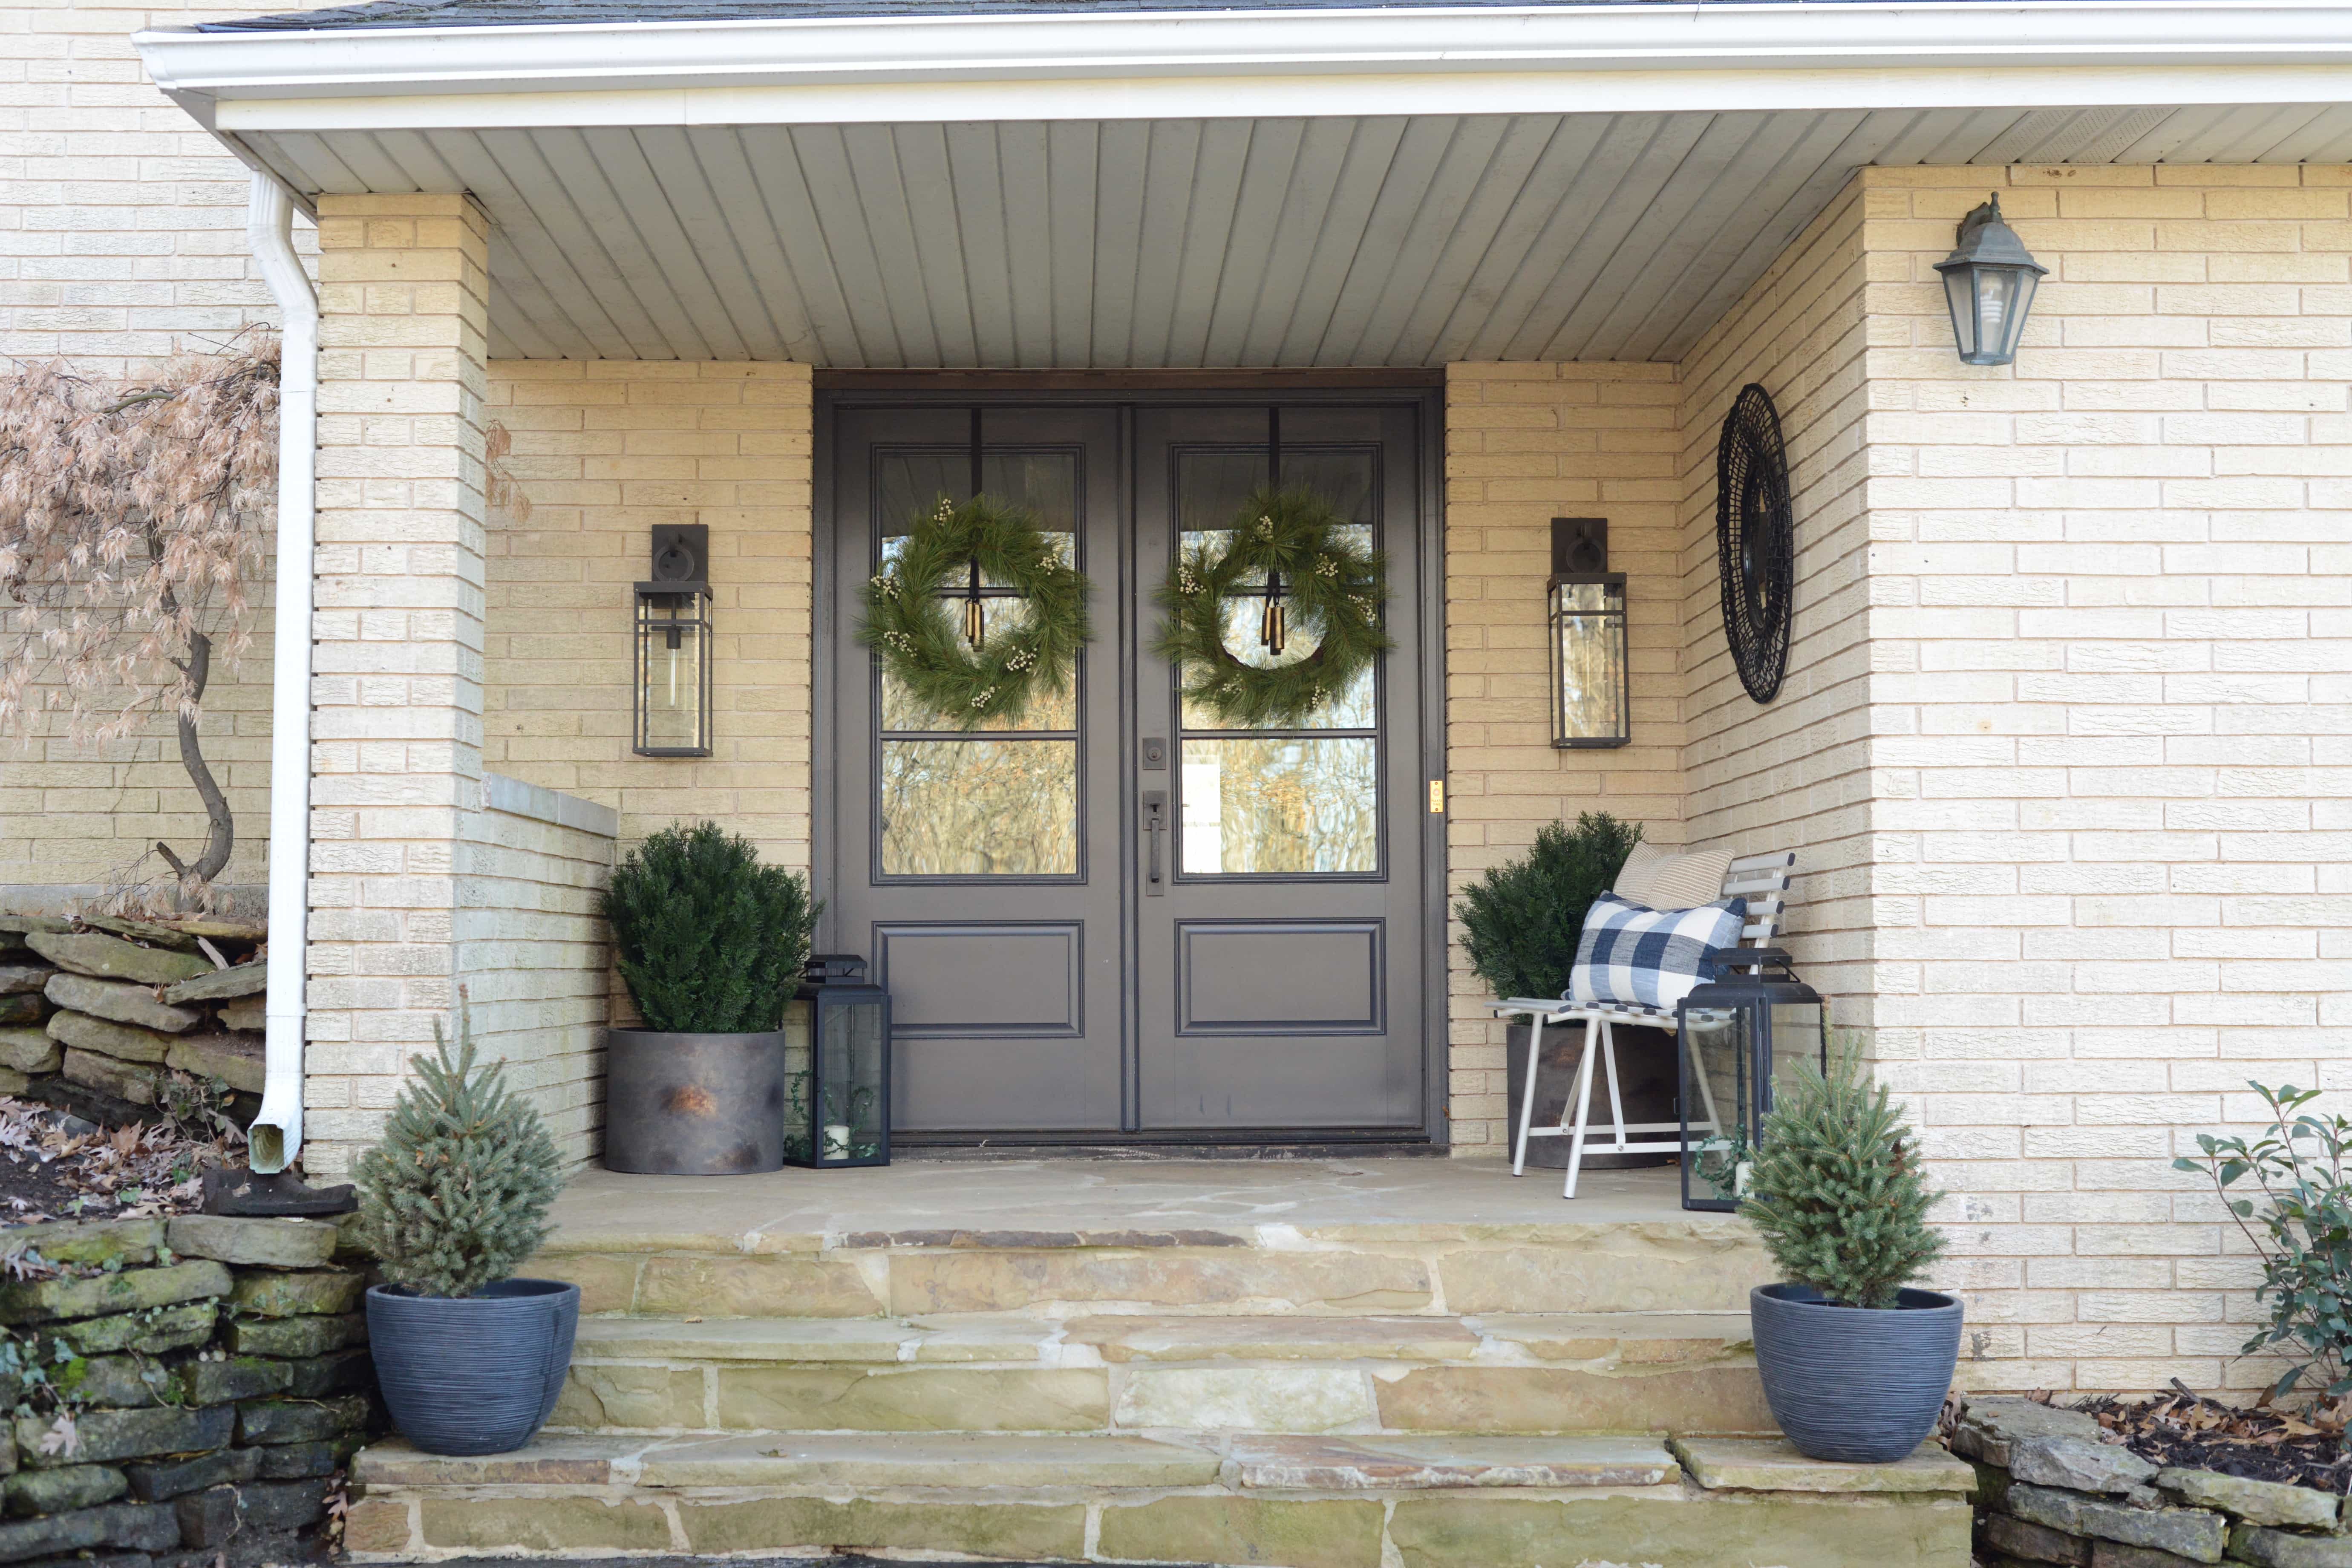 Front porch view with stone floor, black front doors and wreaths